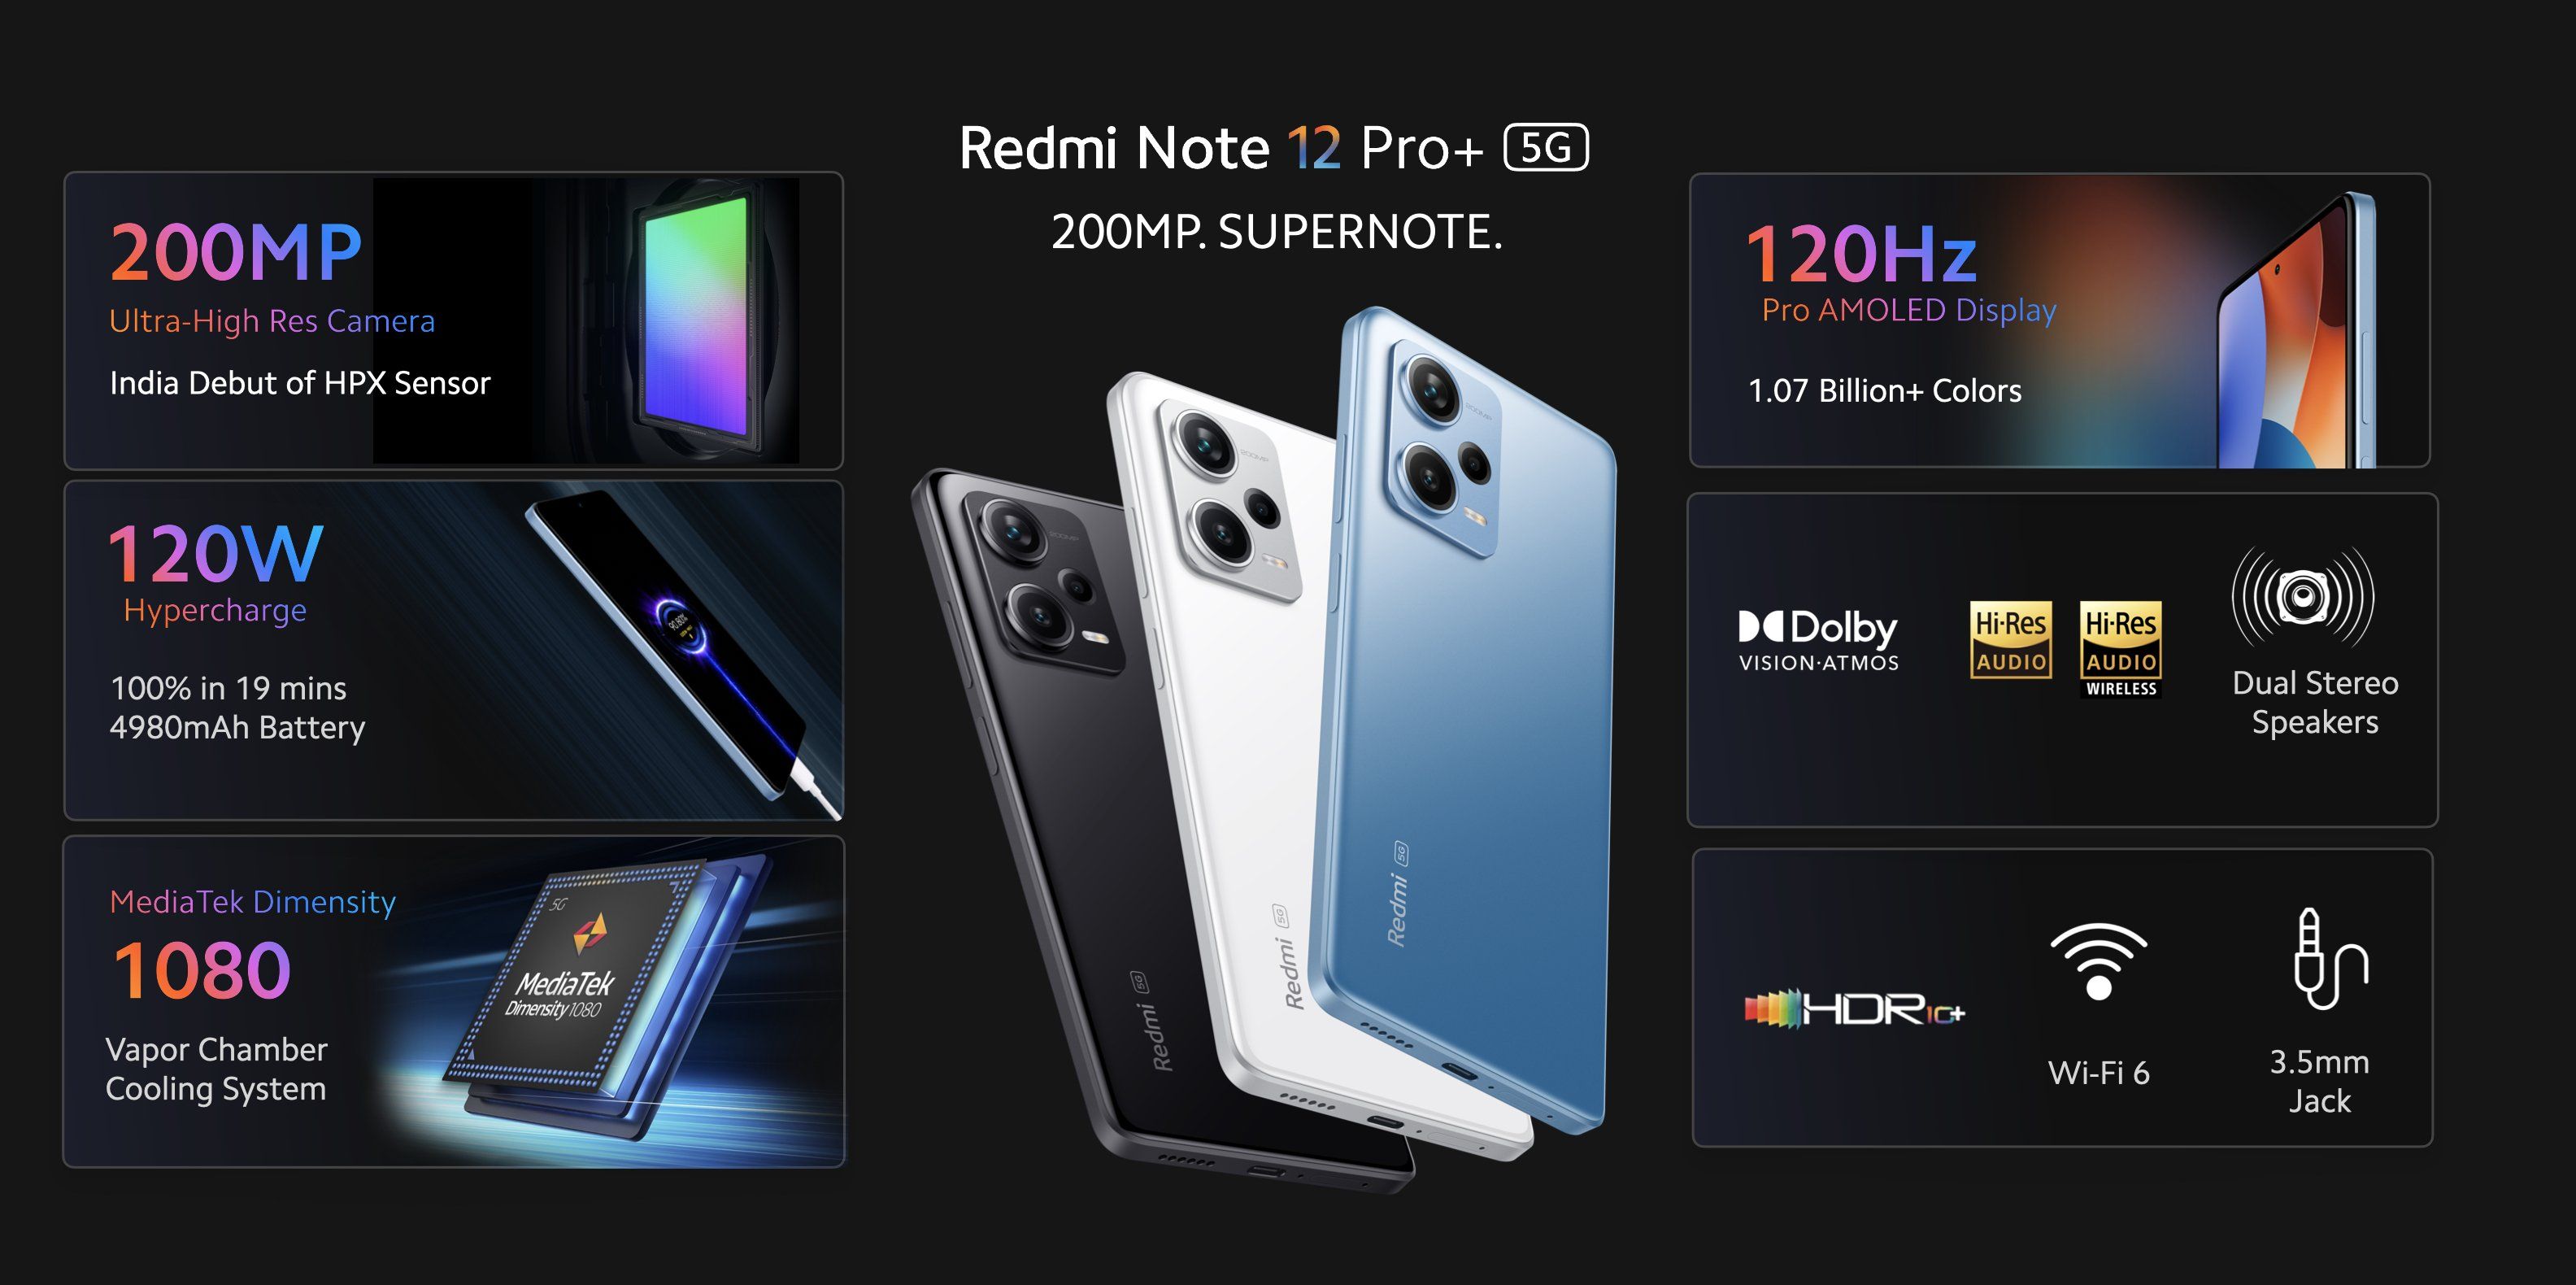 Xiaomi Redmi Note 12 Pro 5G Smartphone Android 12 Dimensity 1080 GPS Global  ROM